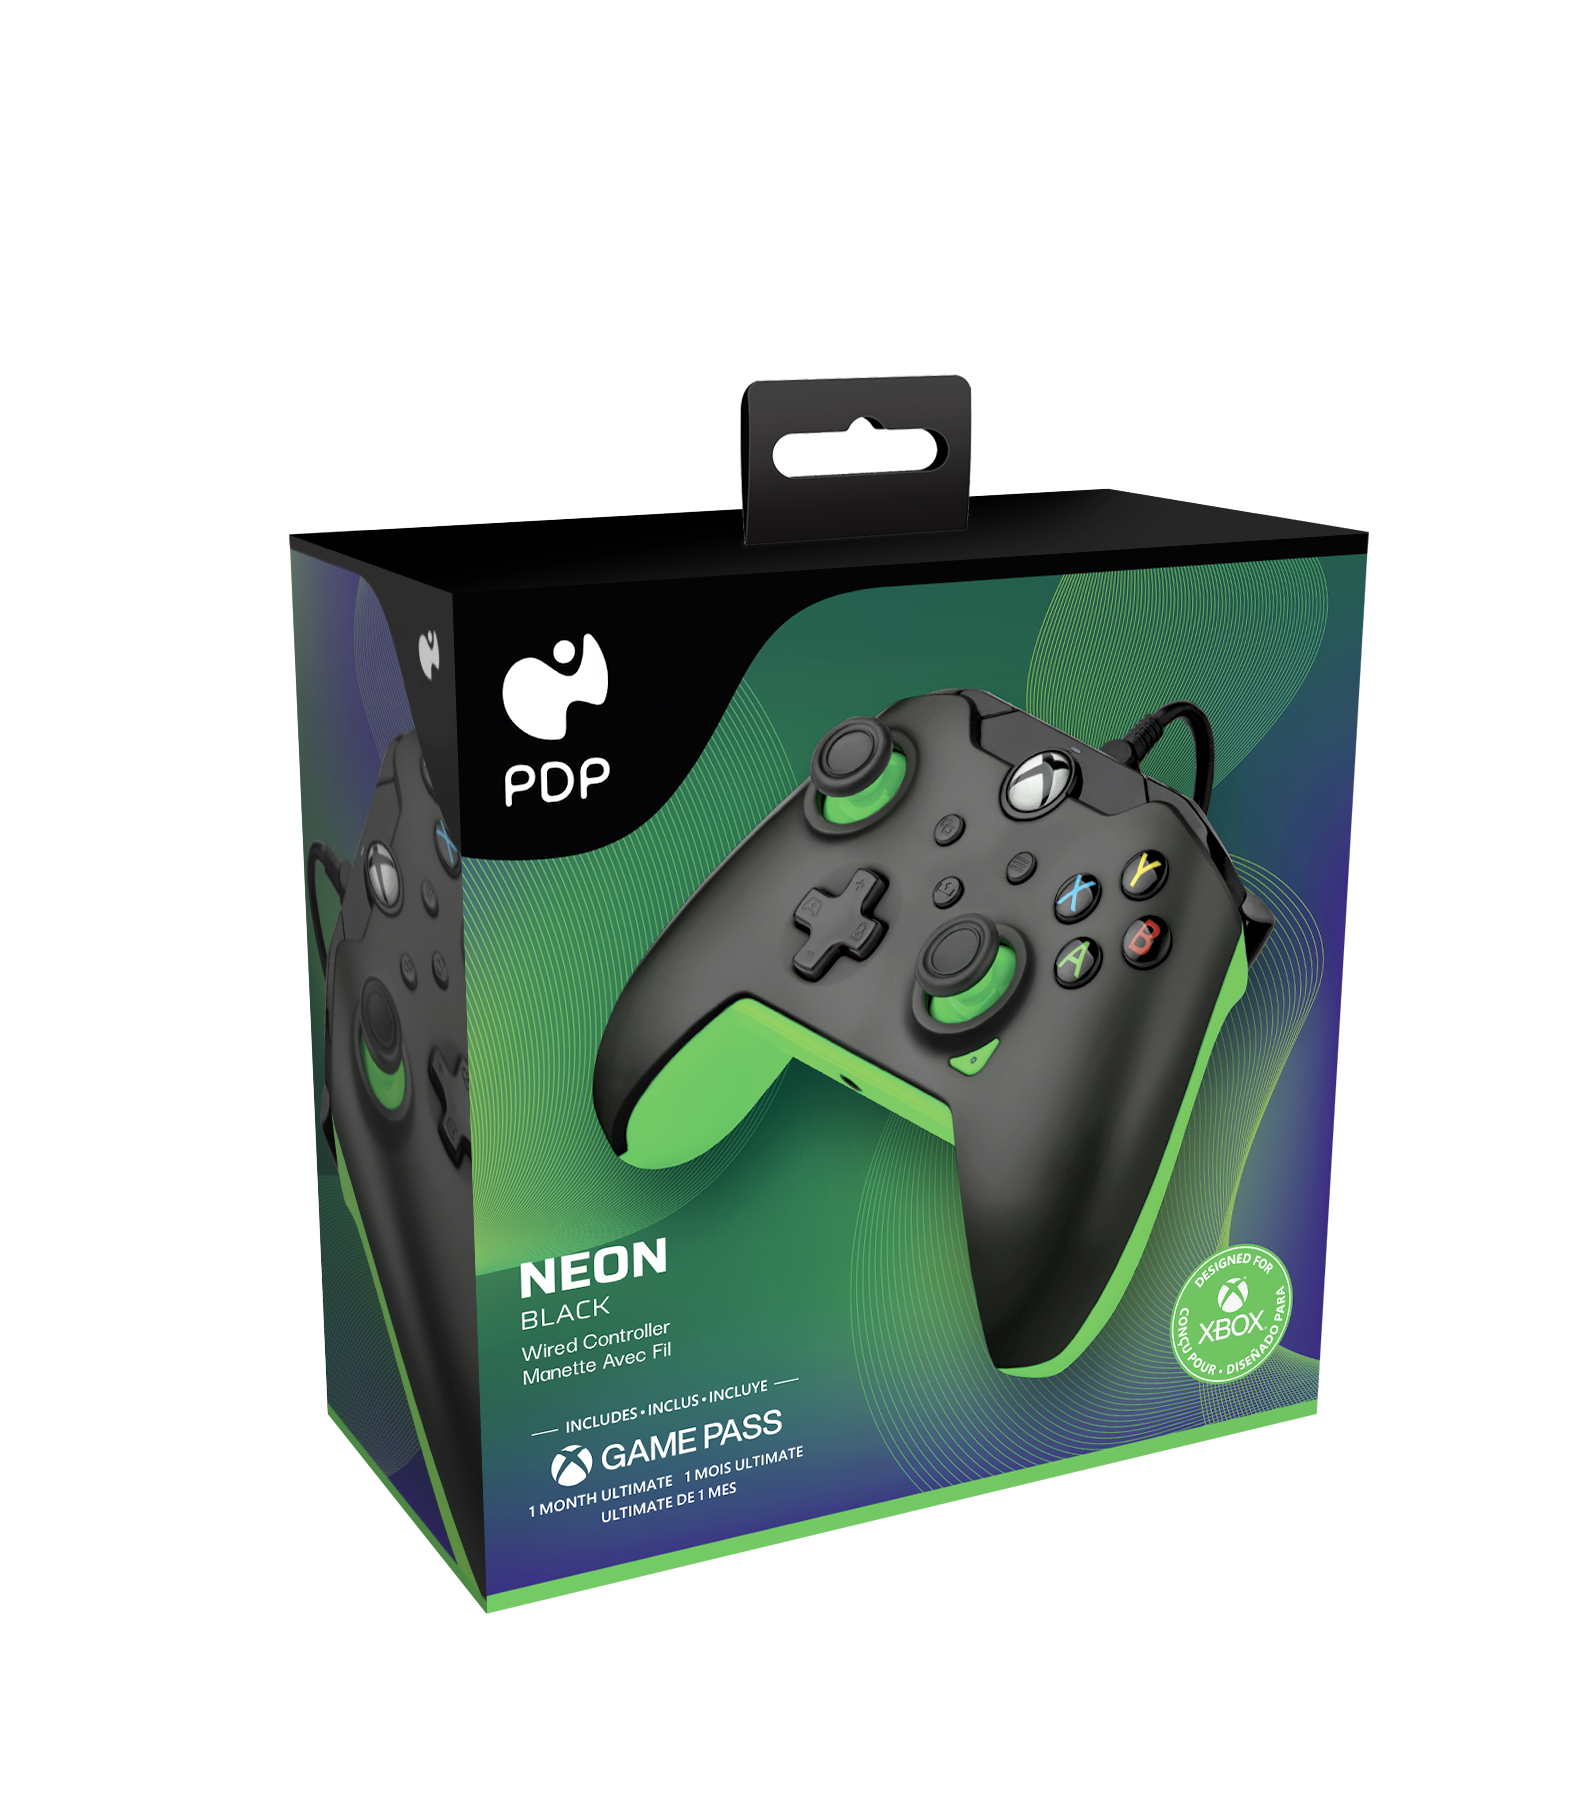 https://scale.coolshop-cdn.com/product-media.coolshop-cdn.com/23DU8J/33ac9fb736ea4ffebb6b939159aa008d.png/f/pdp-gaming-wired-controller-neon-black.png